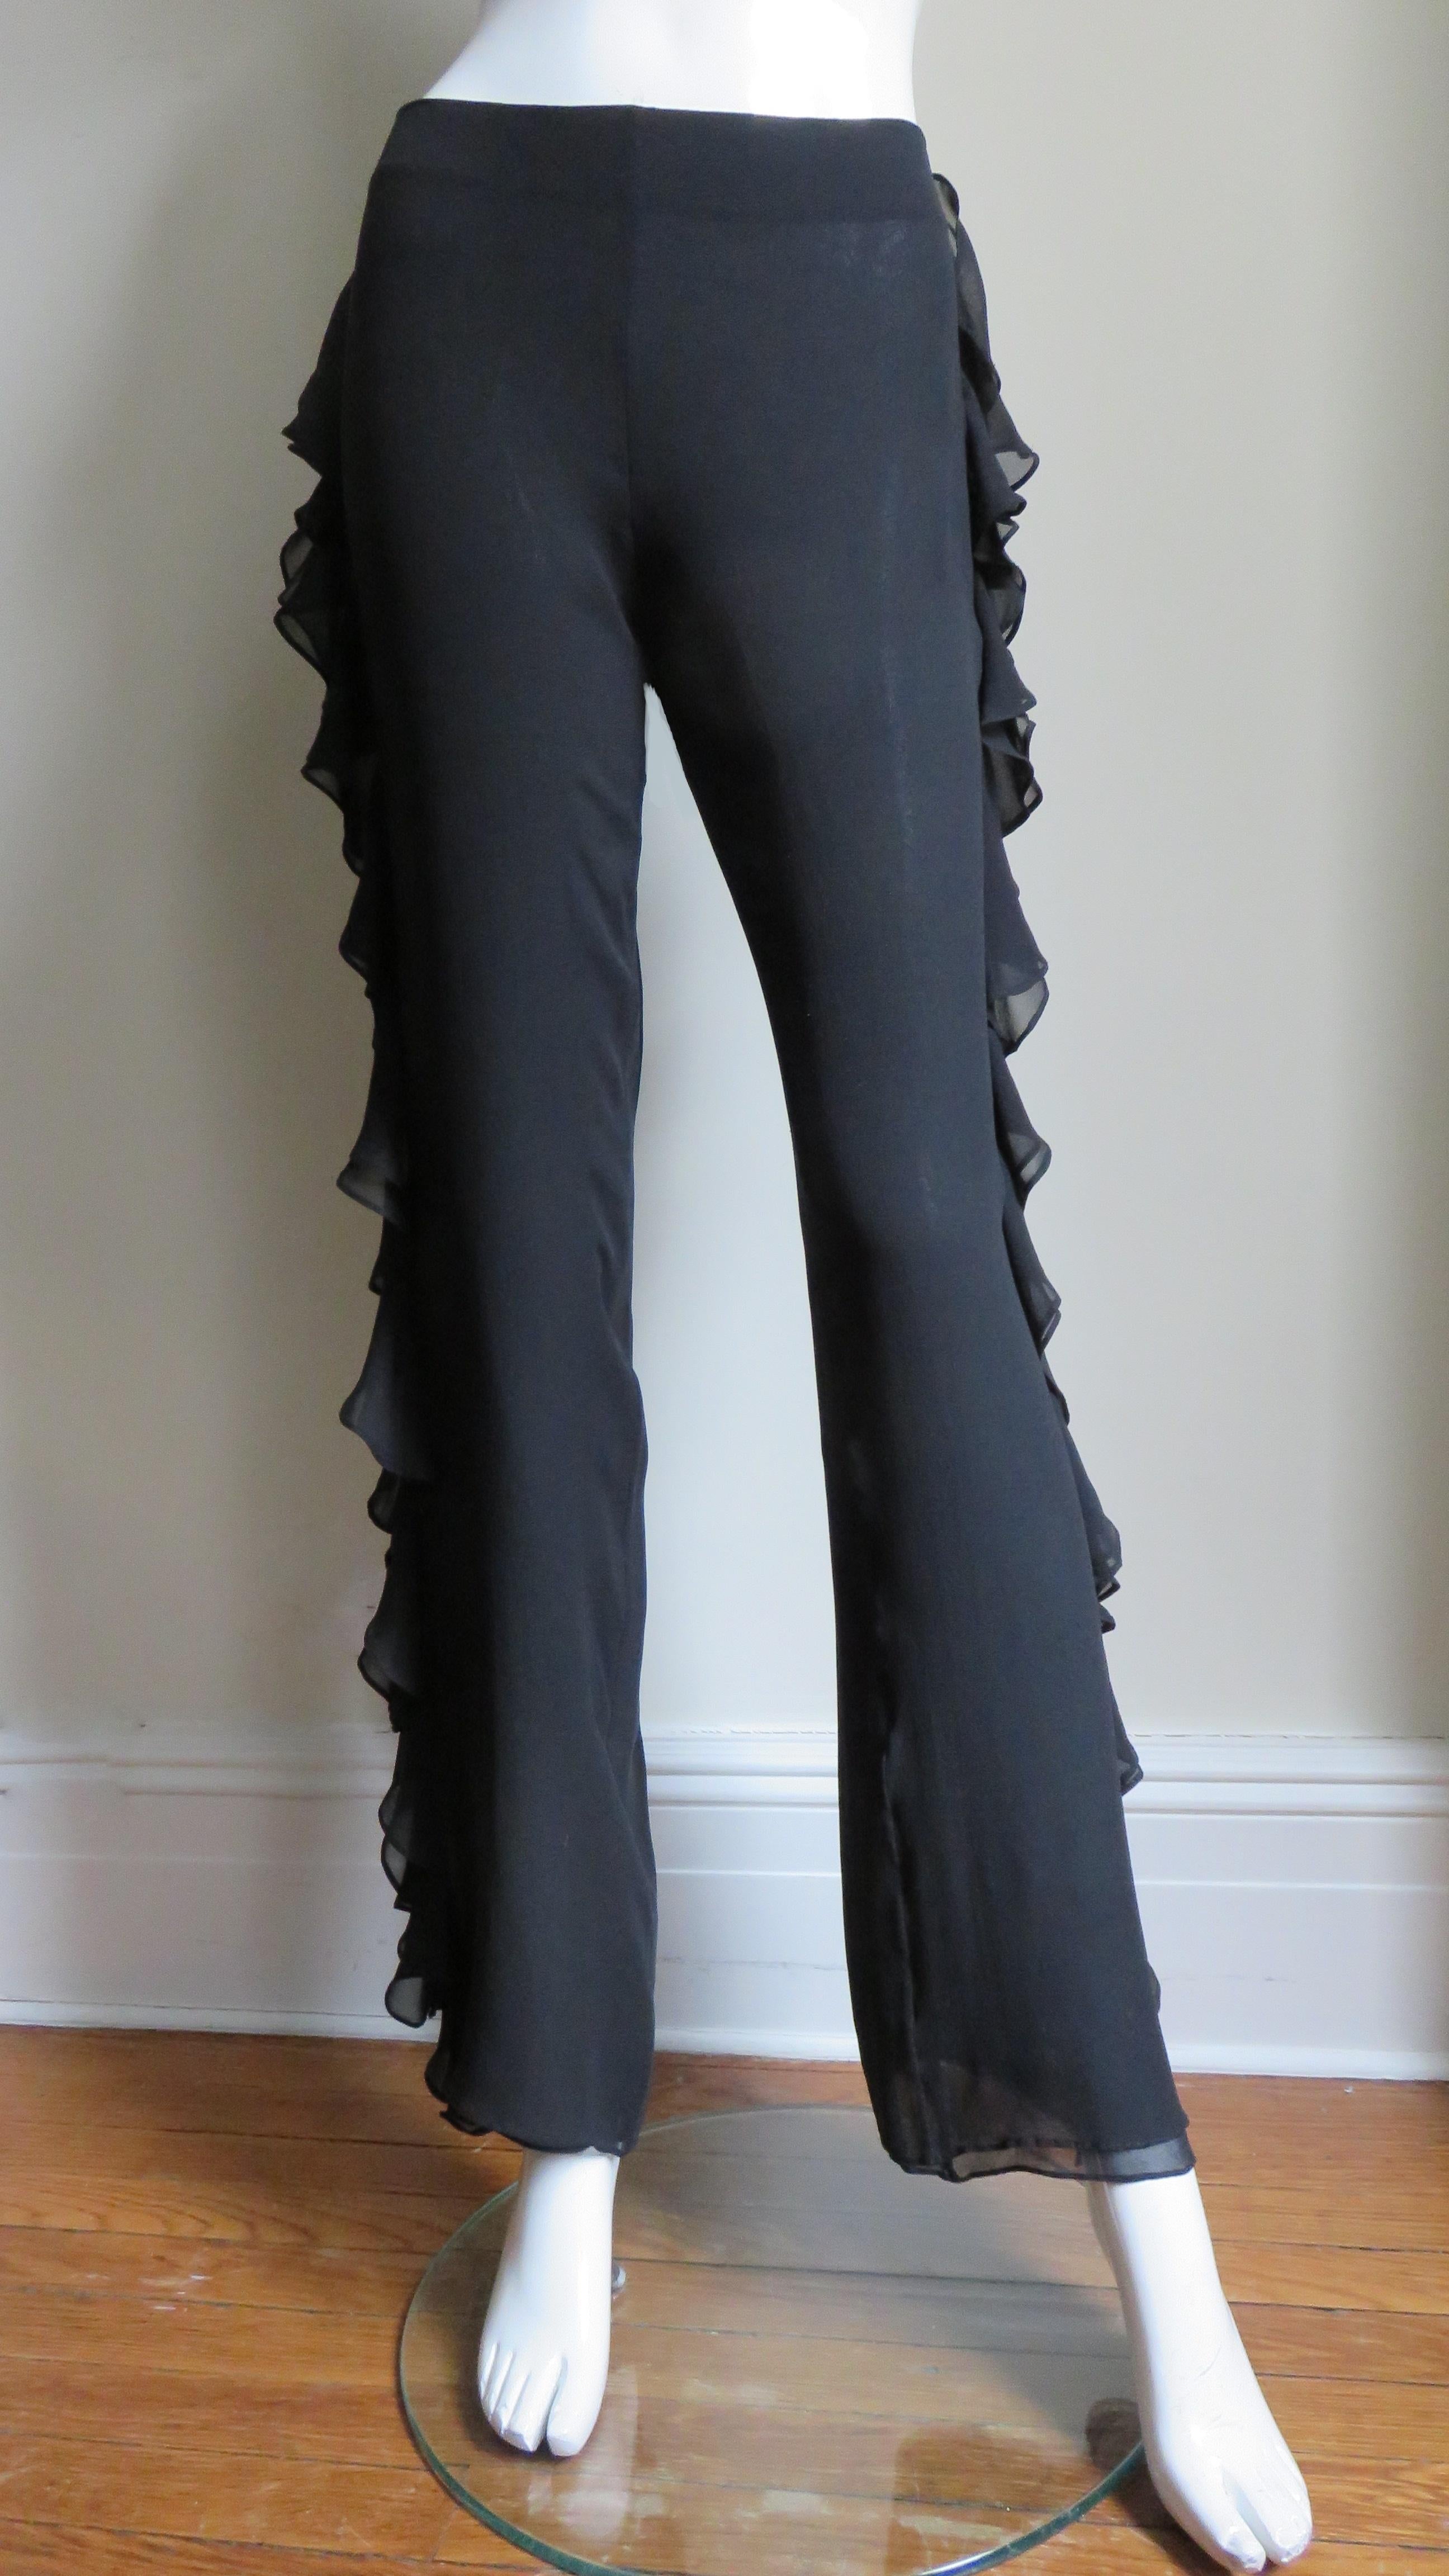 Beautiful John Bartlett pants made of a double layer of black silk with with a double layer of ruffles along the entire length of each side.  The pants sit just below the waist and have narrow legs and a side zipper.  
Fits size Small,